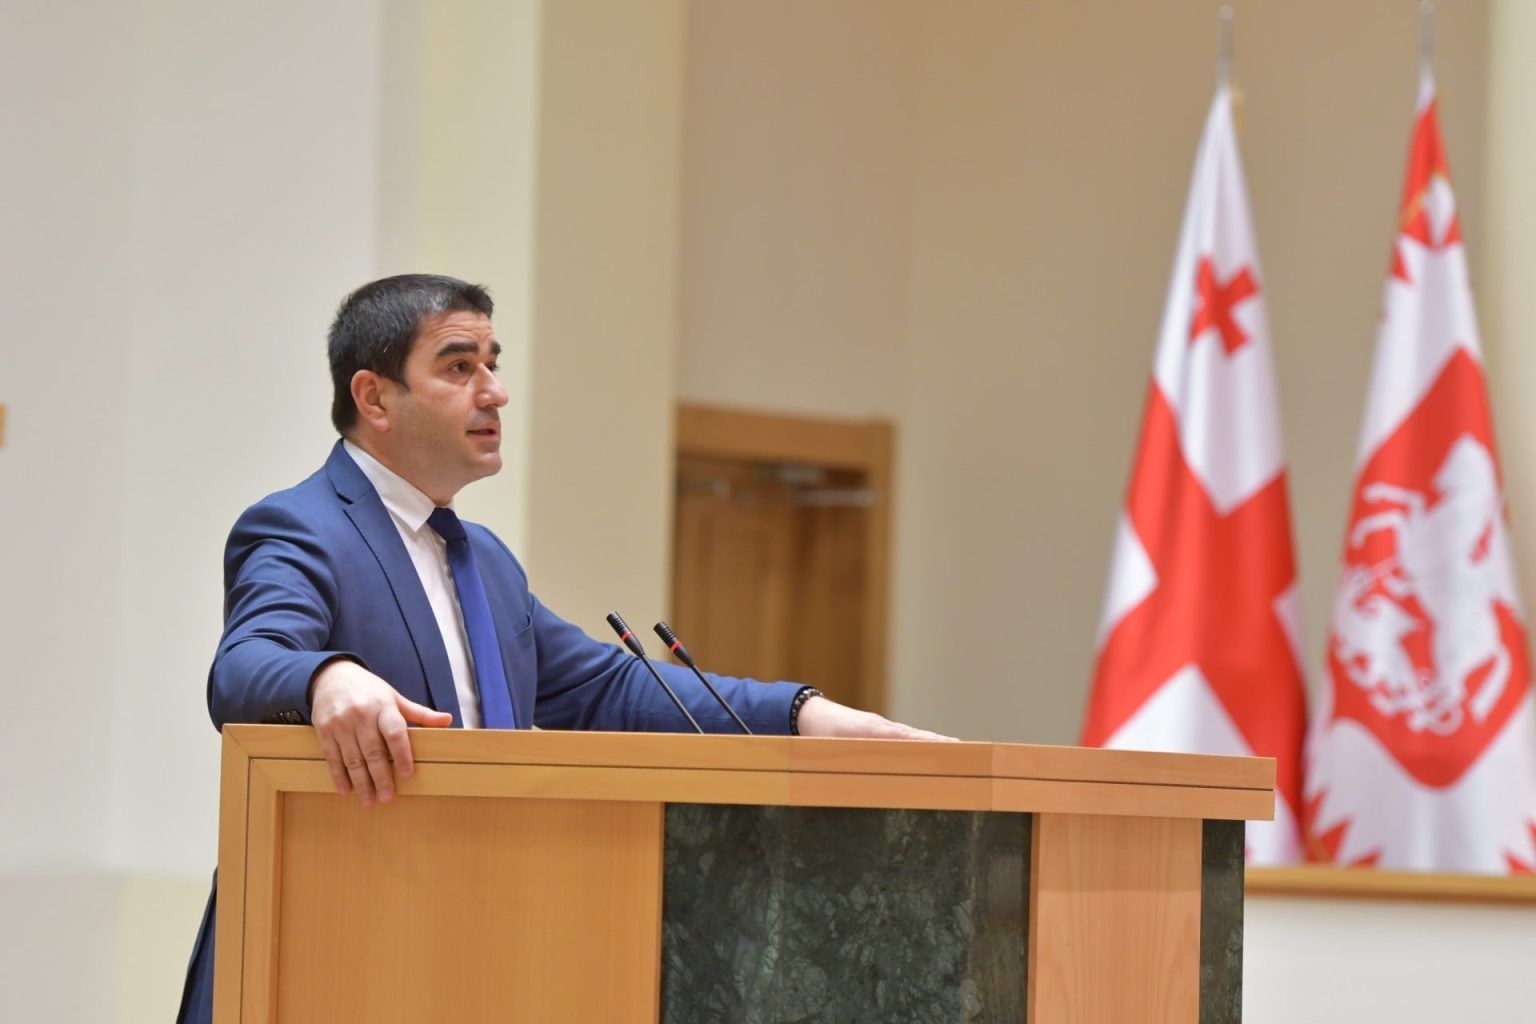 Speaker: Azerbaijan and Georgia are united not only by friendship but also by brotherly relations